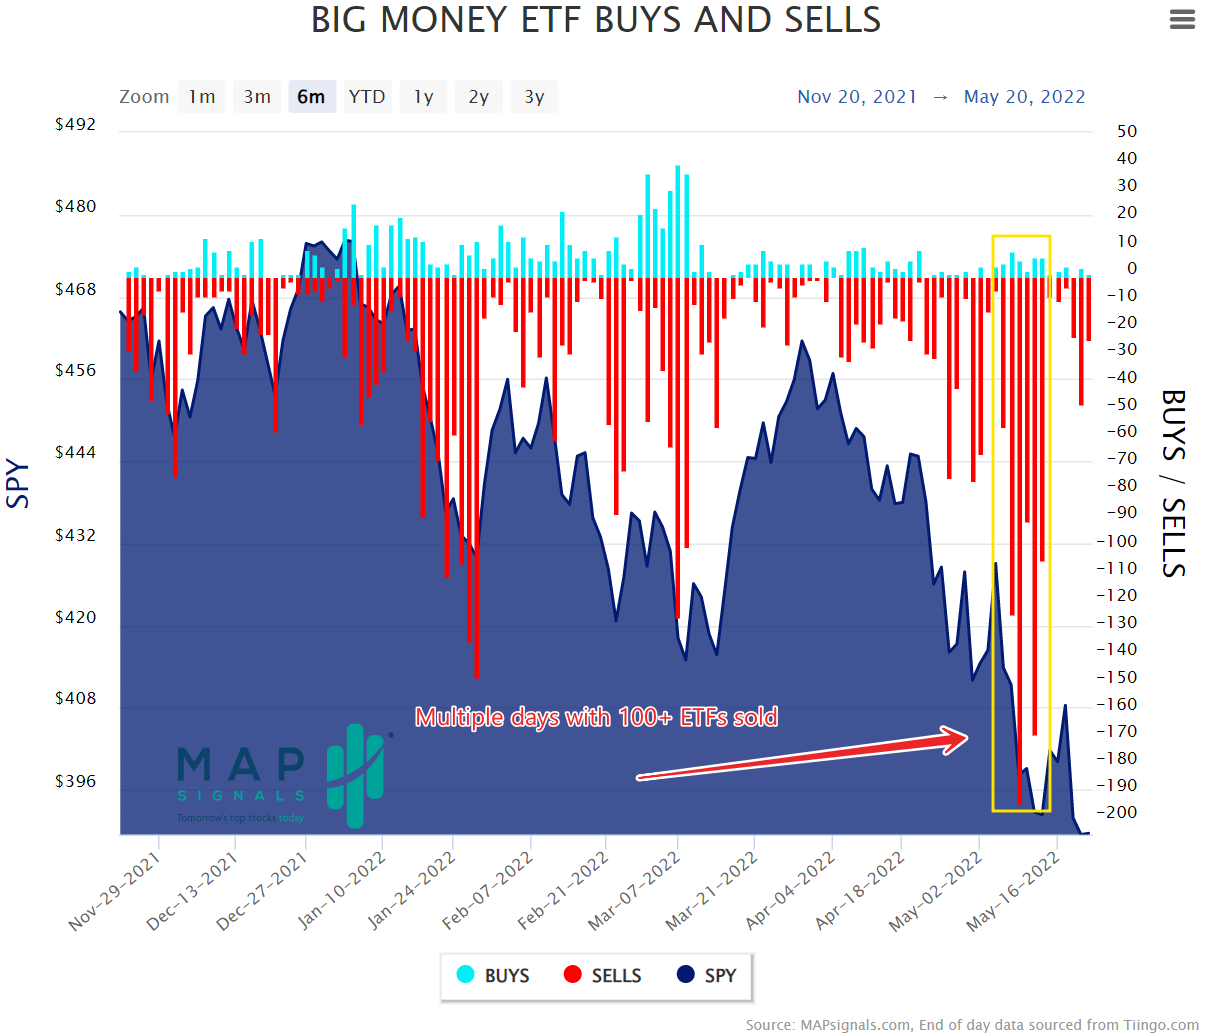 Big Money ETF Buys and Sells 6 months